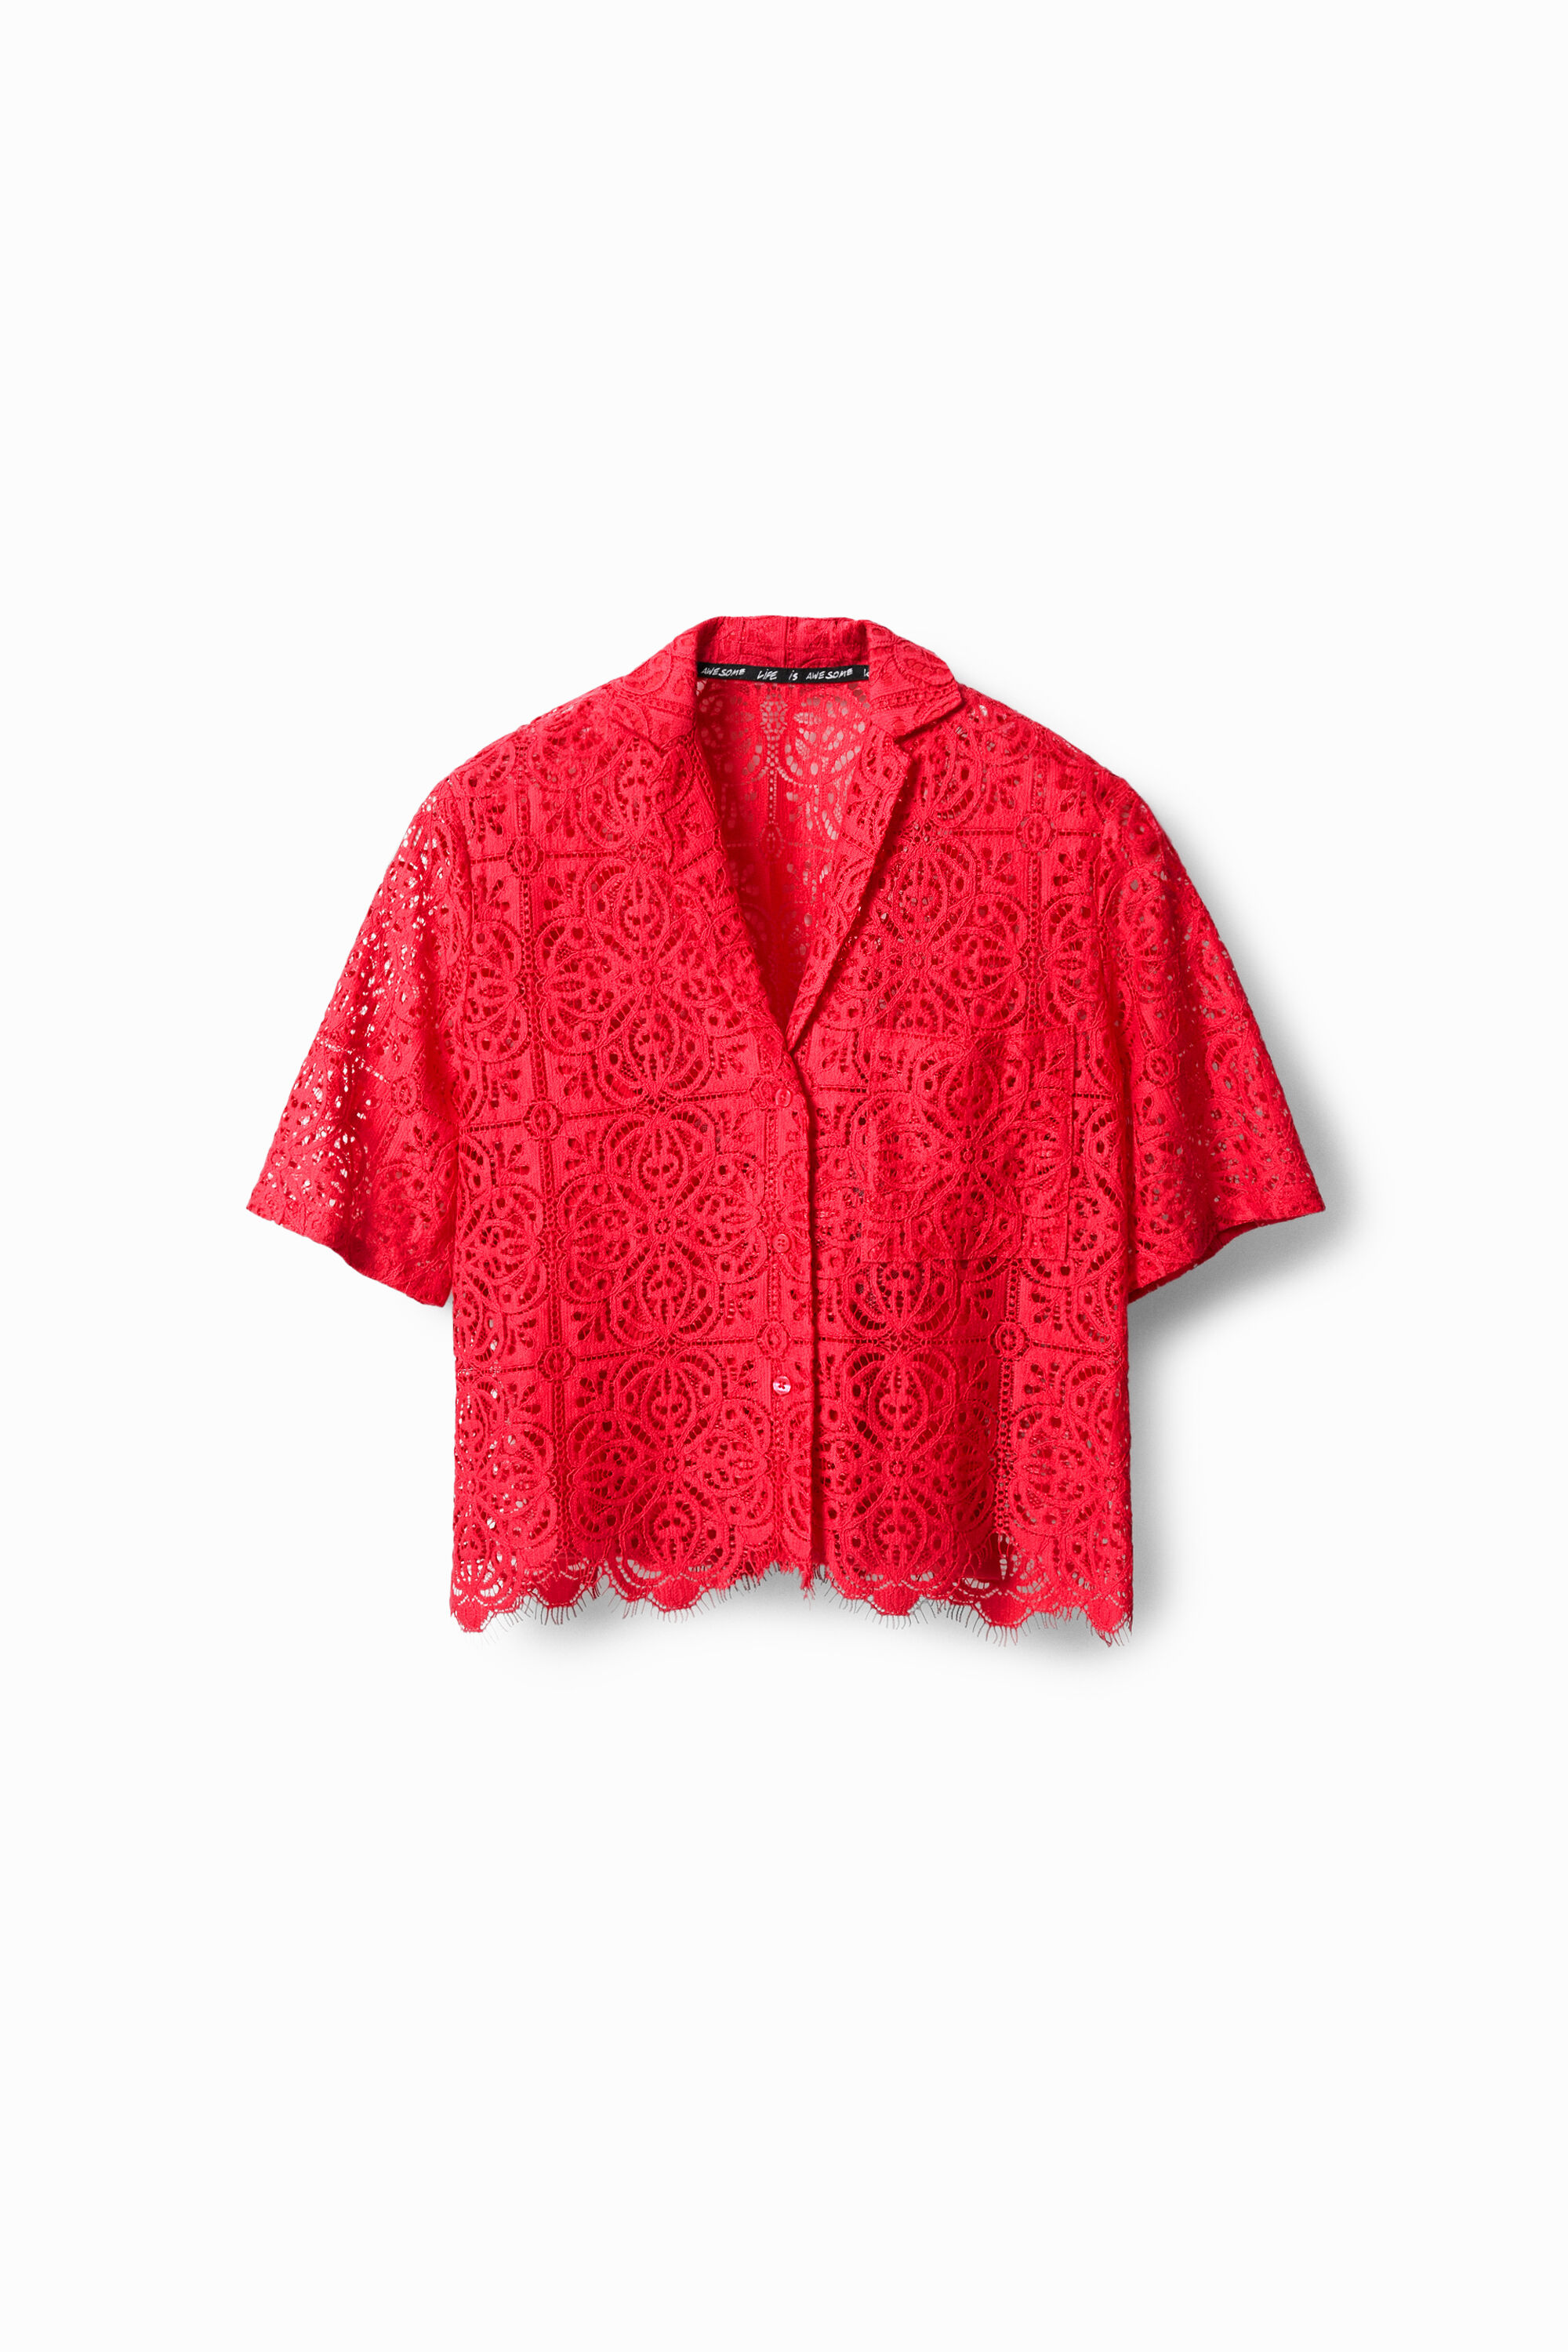 Desigual Lace Shirt In Red